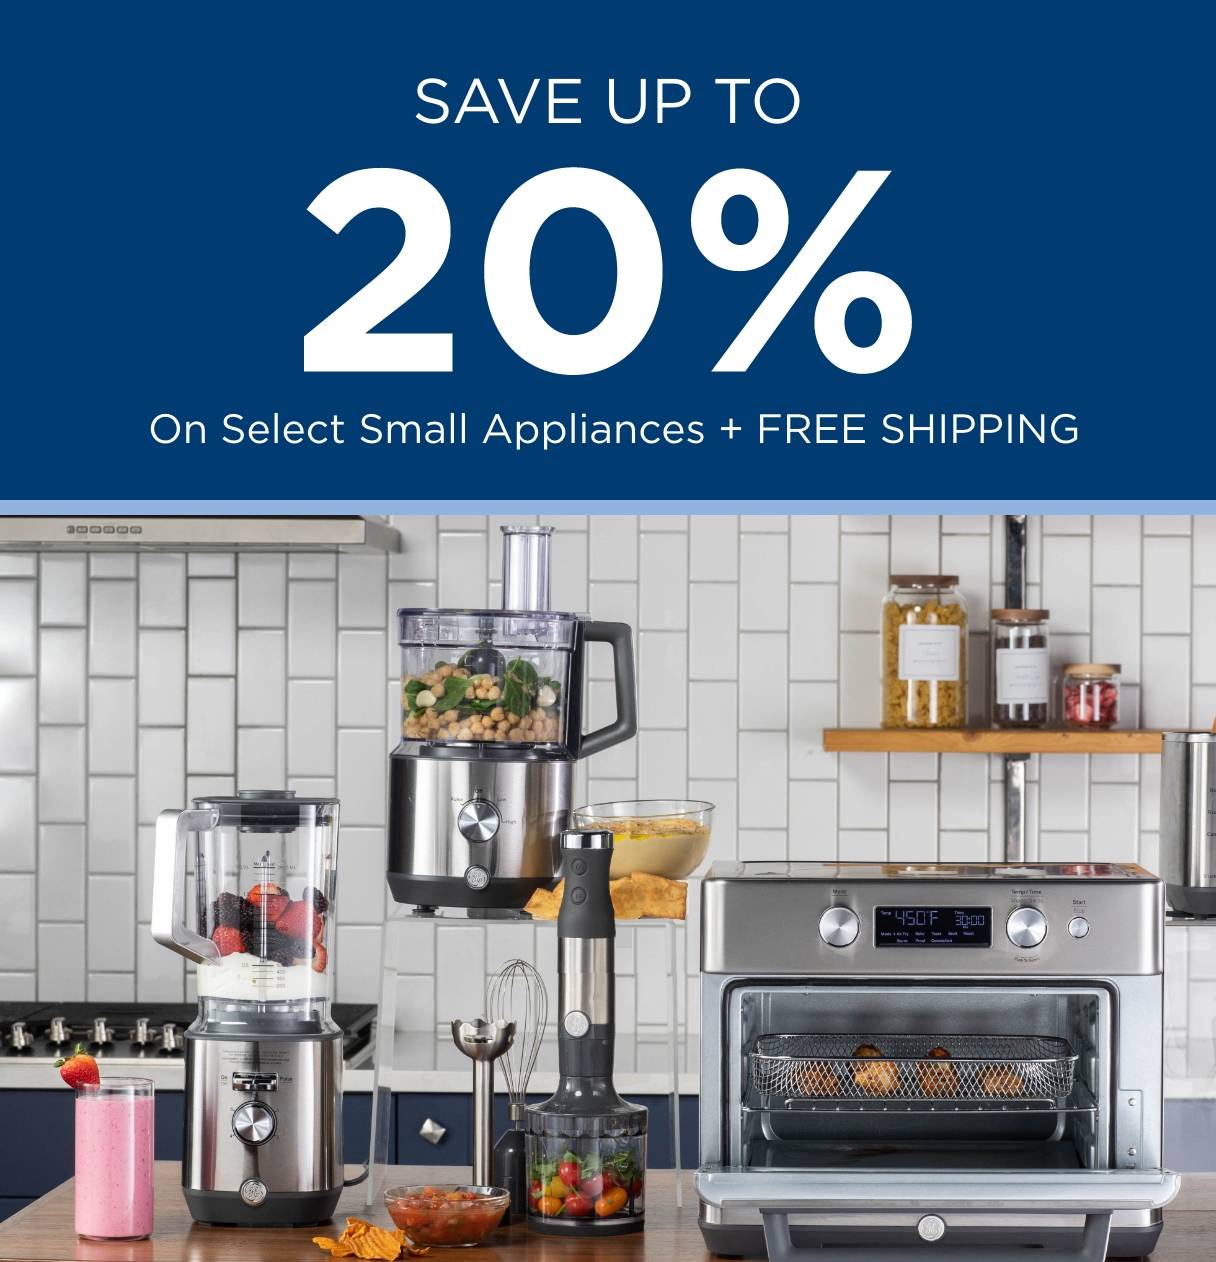 Save Up to 20% on select Small Appliances + Free Shipping on select small appliances